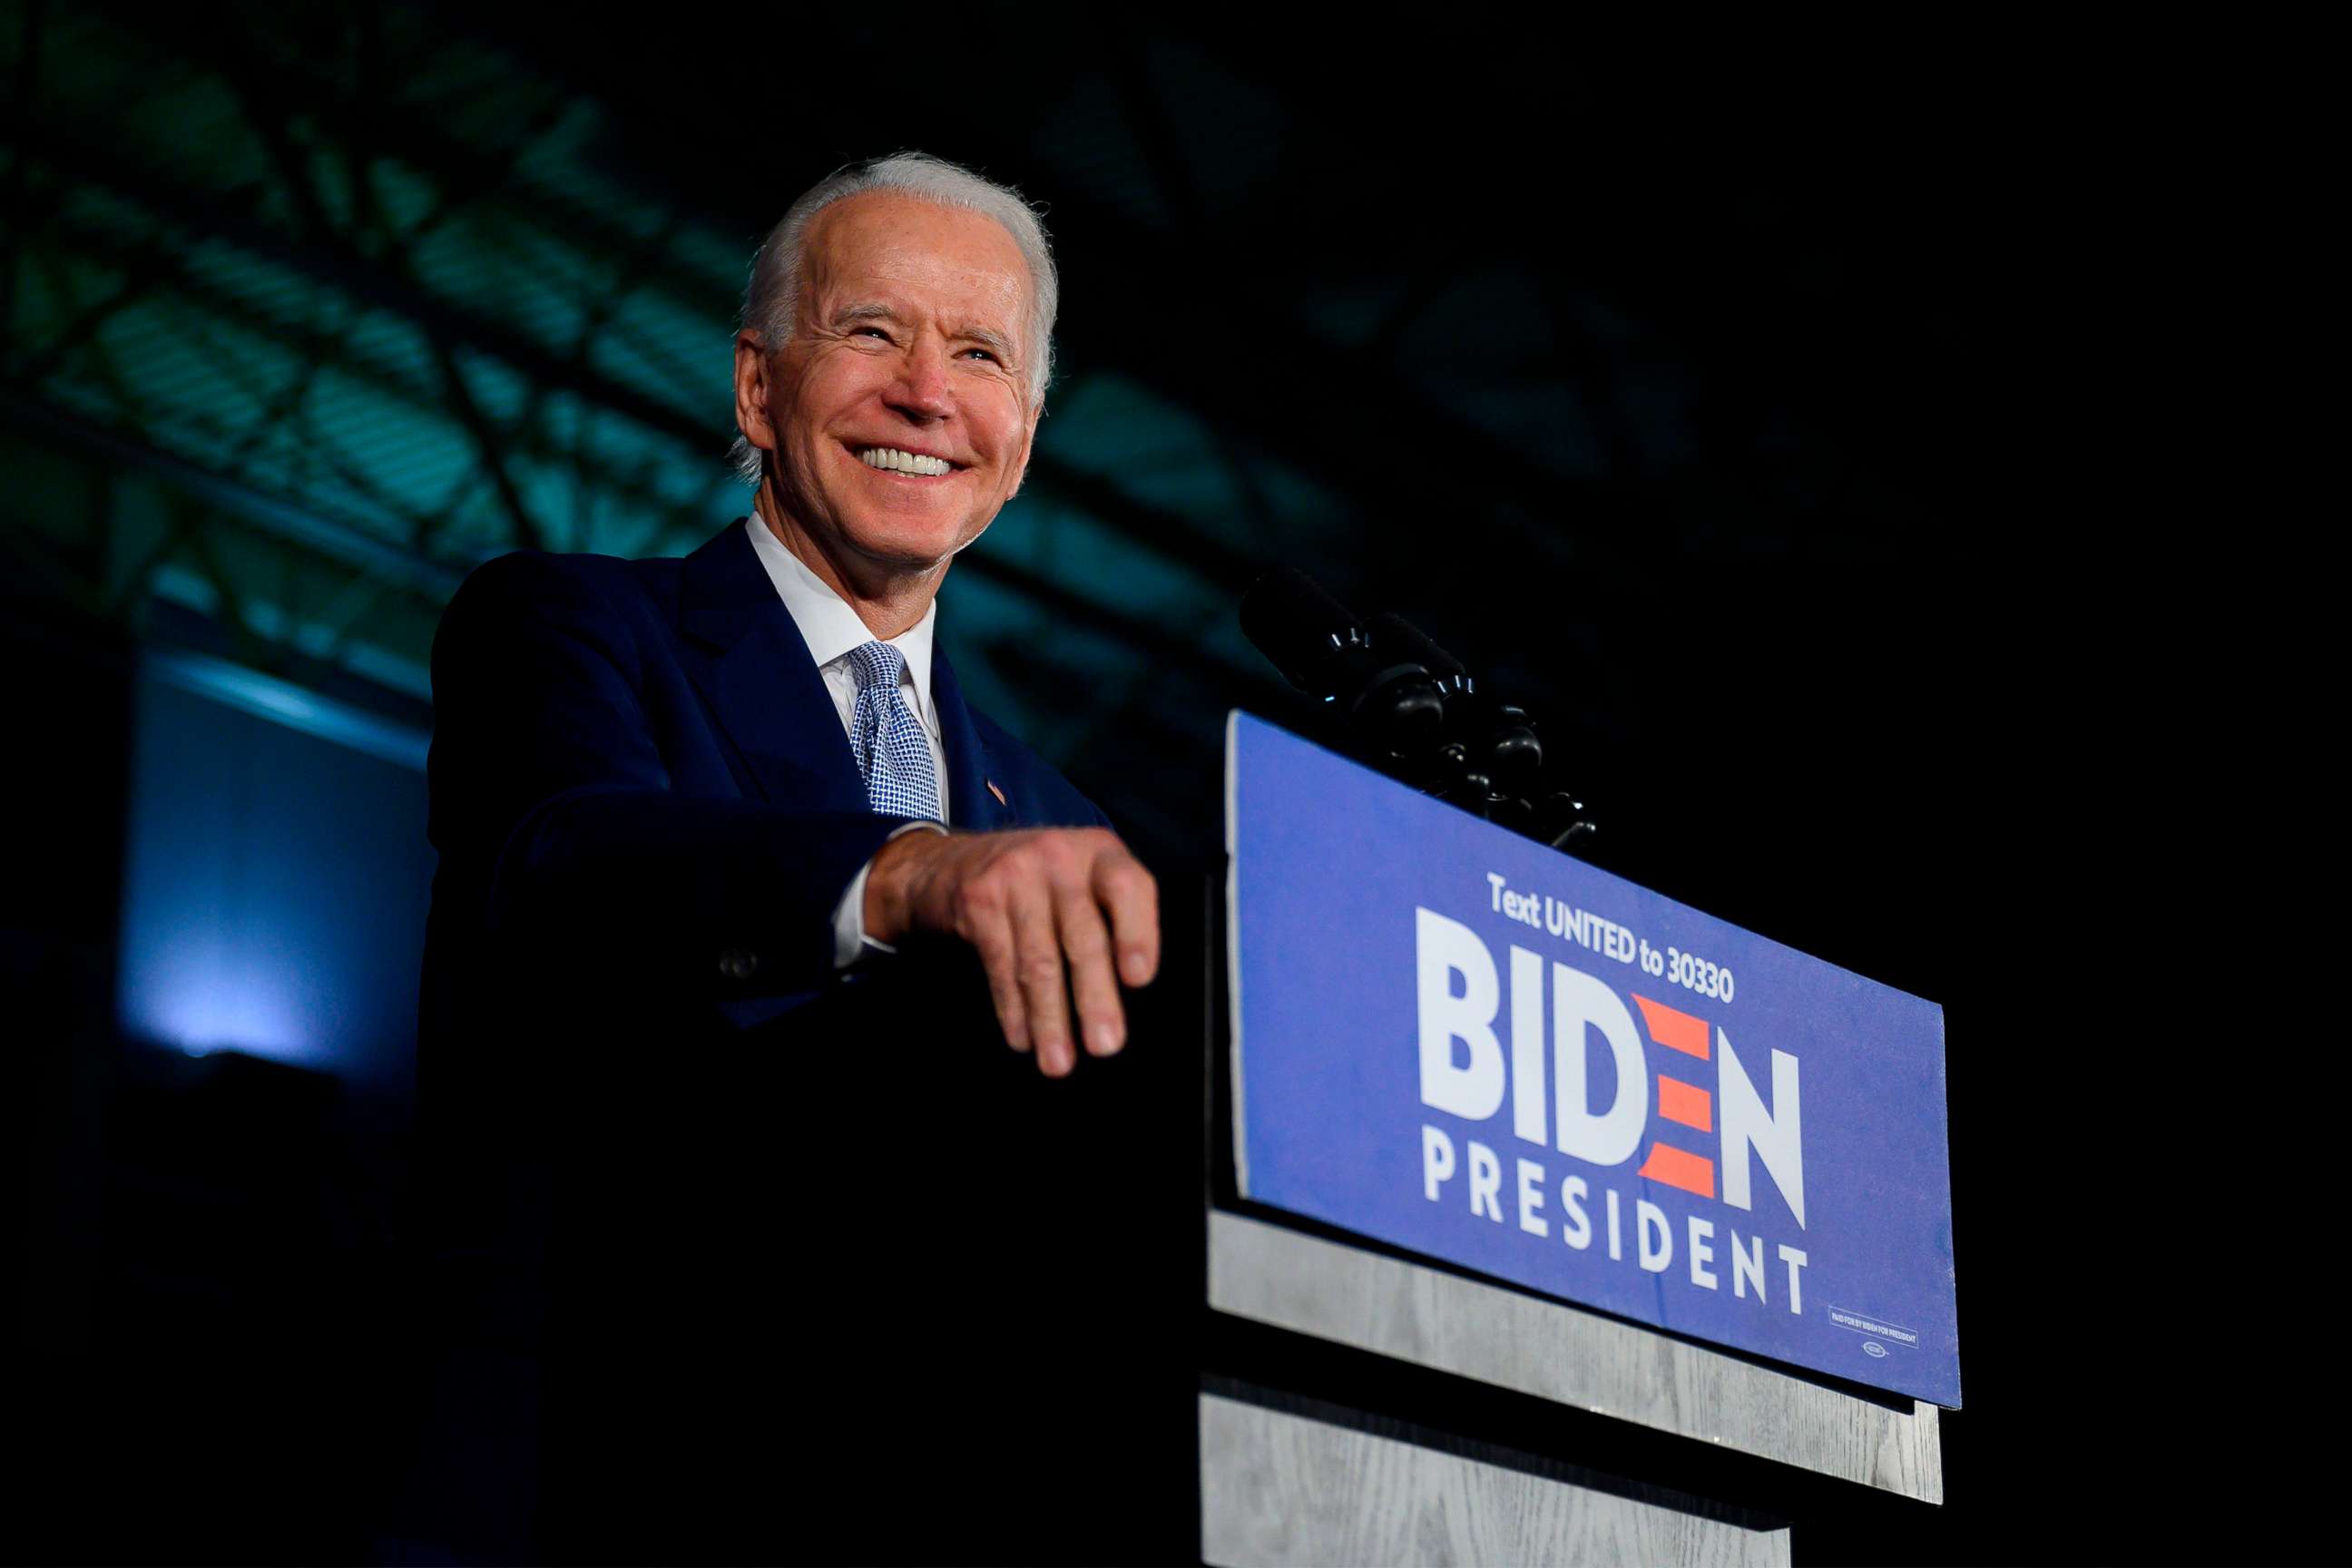 PHOTO: (FILES) In this file photo taken on February 29, 2020 Democratic presidential candidate Joe Biden delivers remarks at his primary night election event in Columbia, South Carolina.